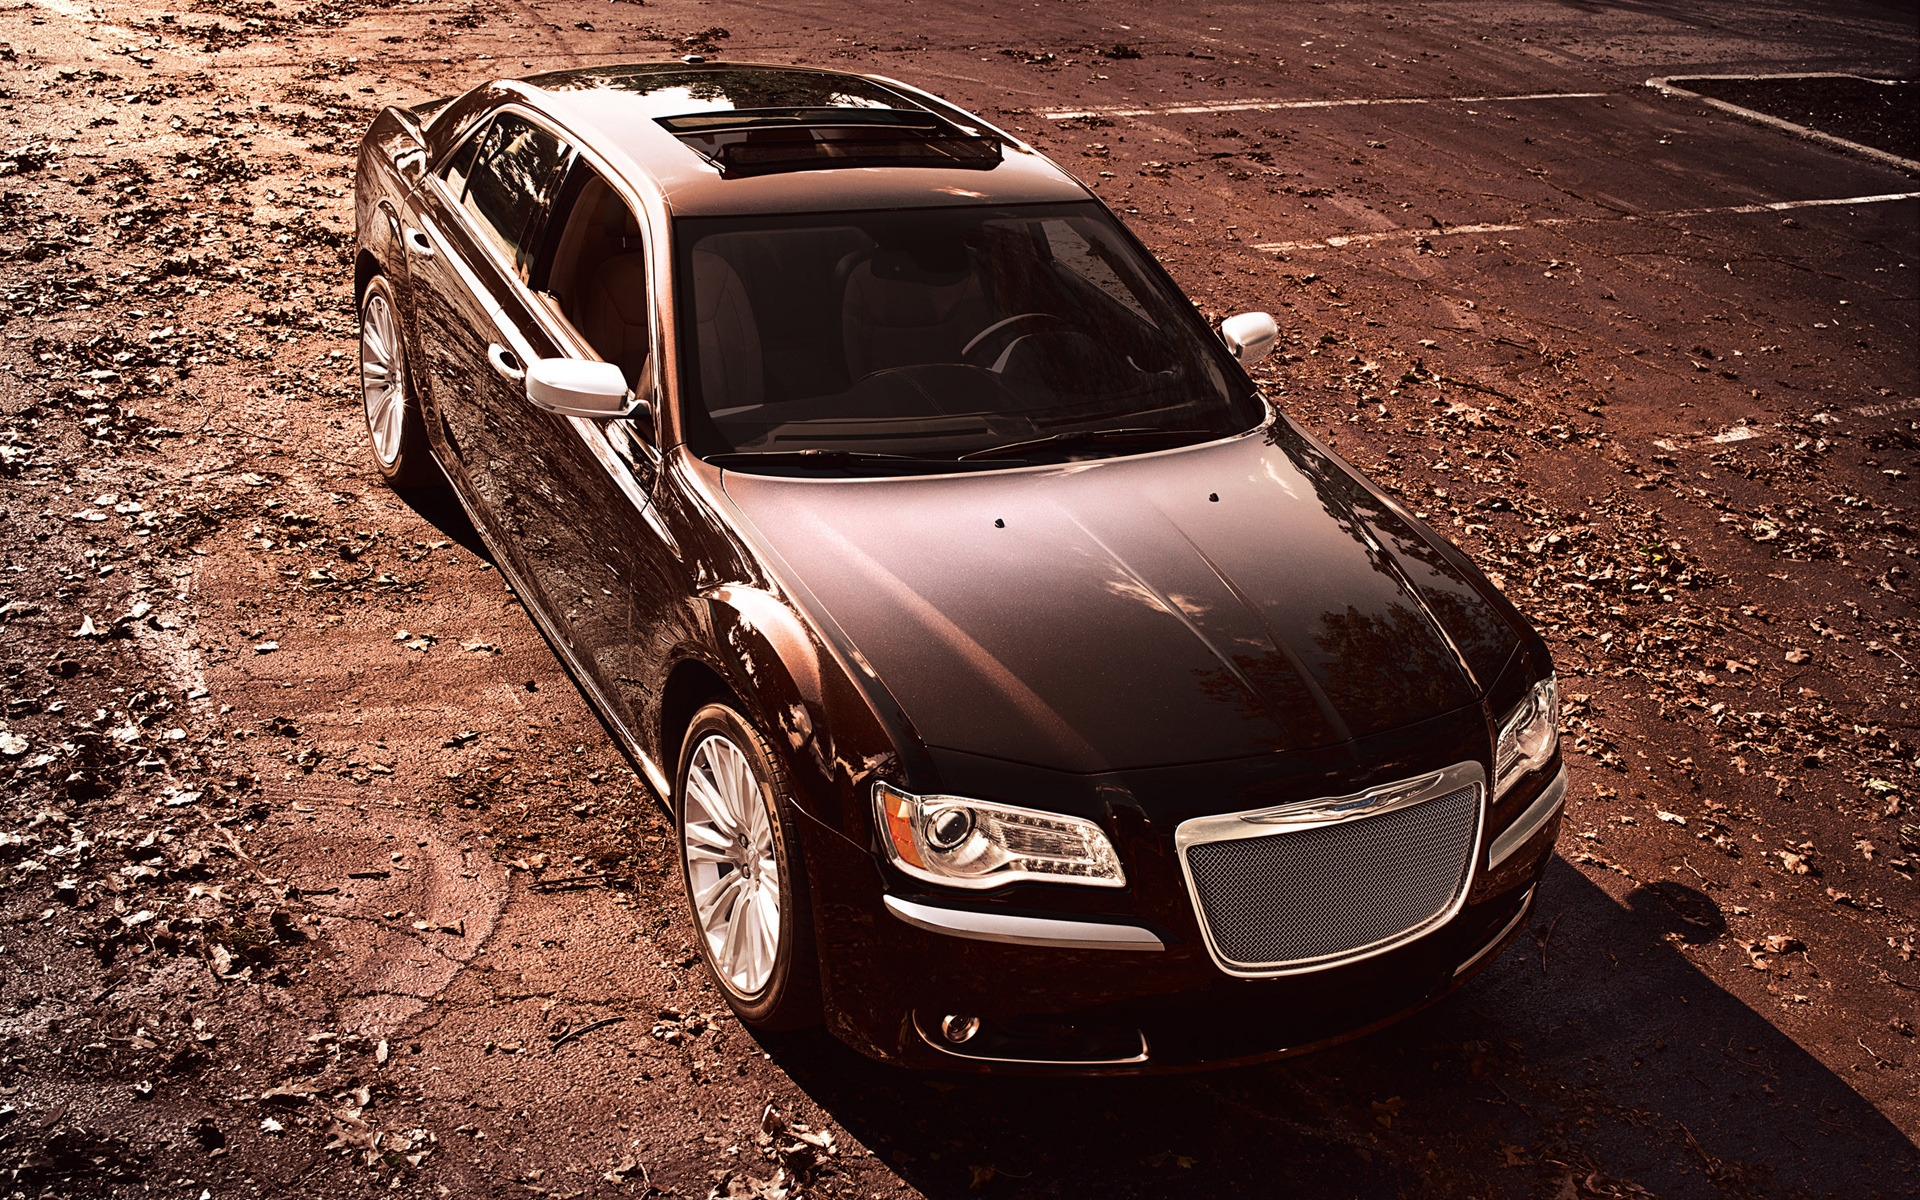 2012 Chrysler 300 Luxury Series for 1920 x 1200 widescreen resolution